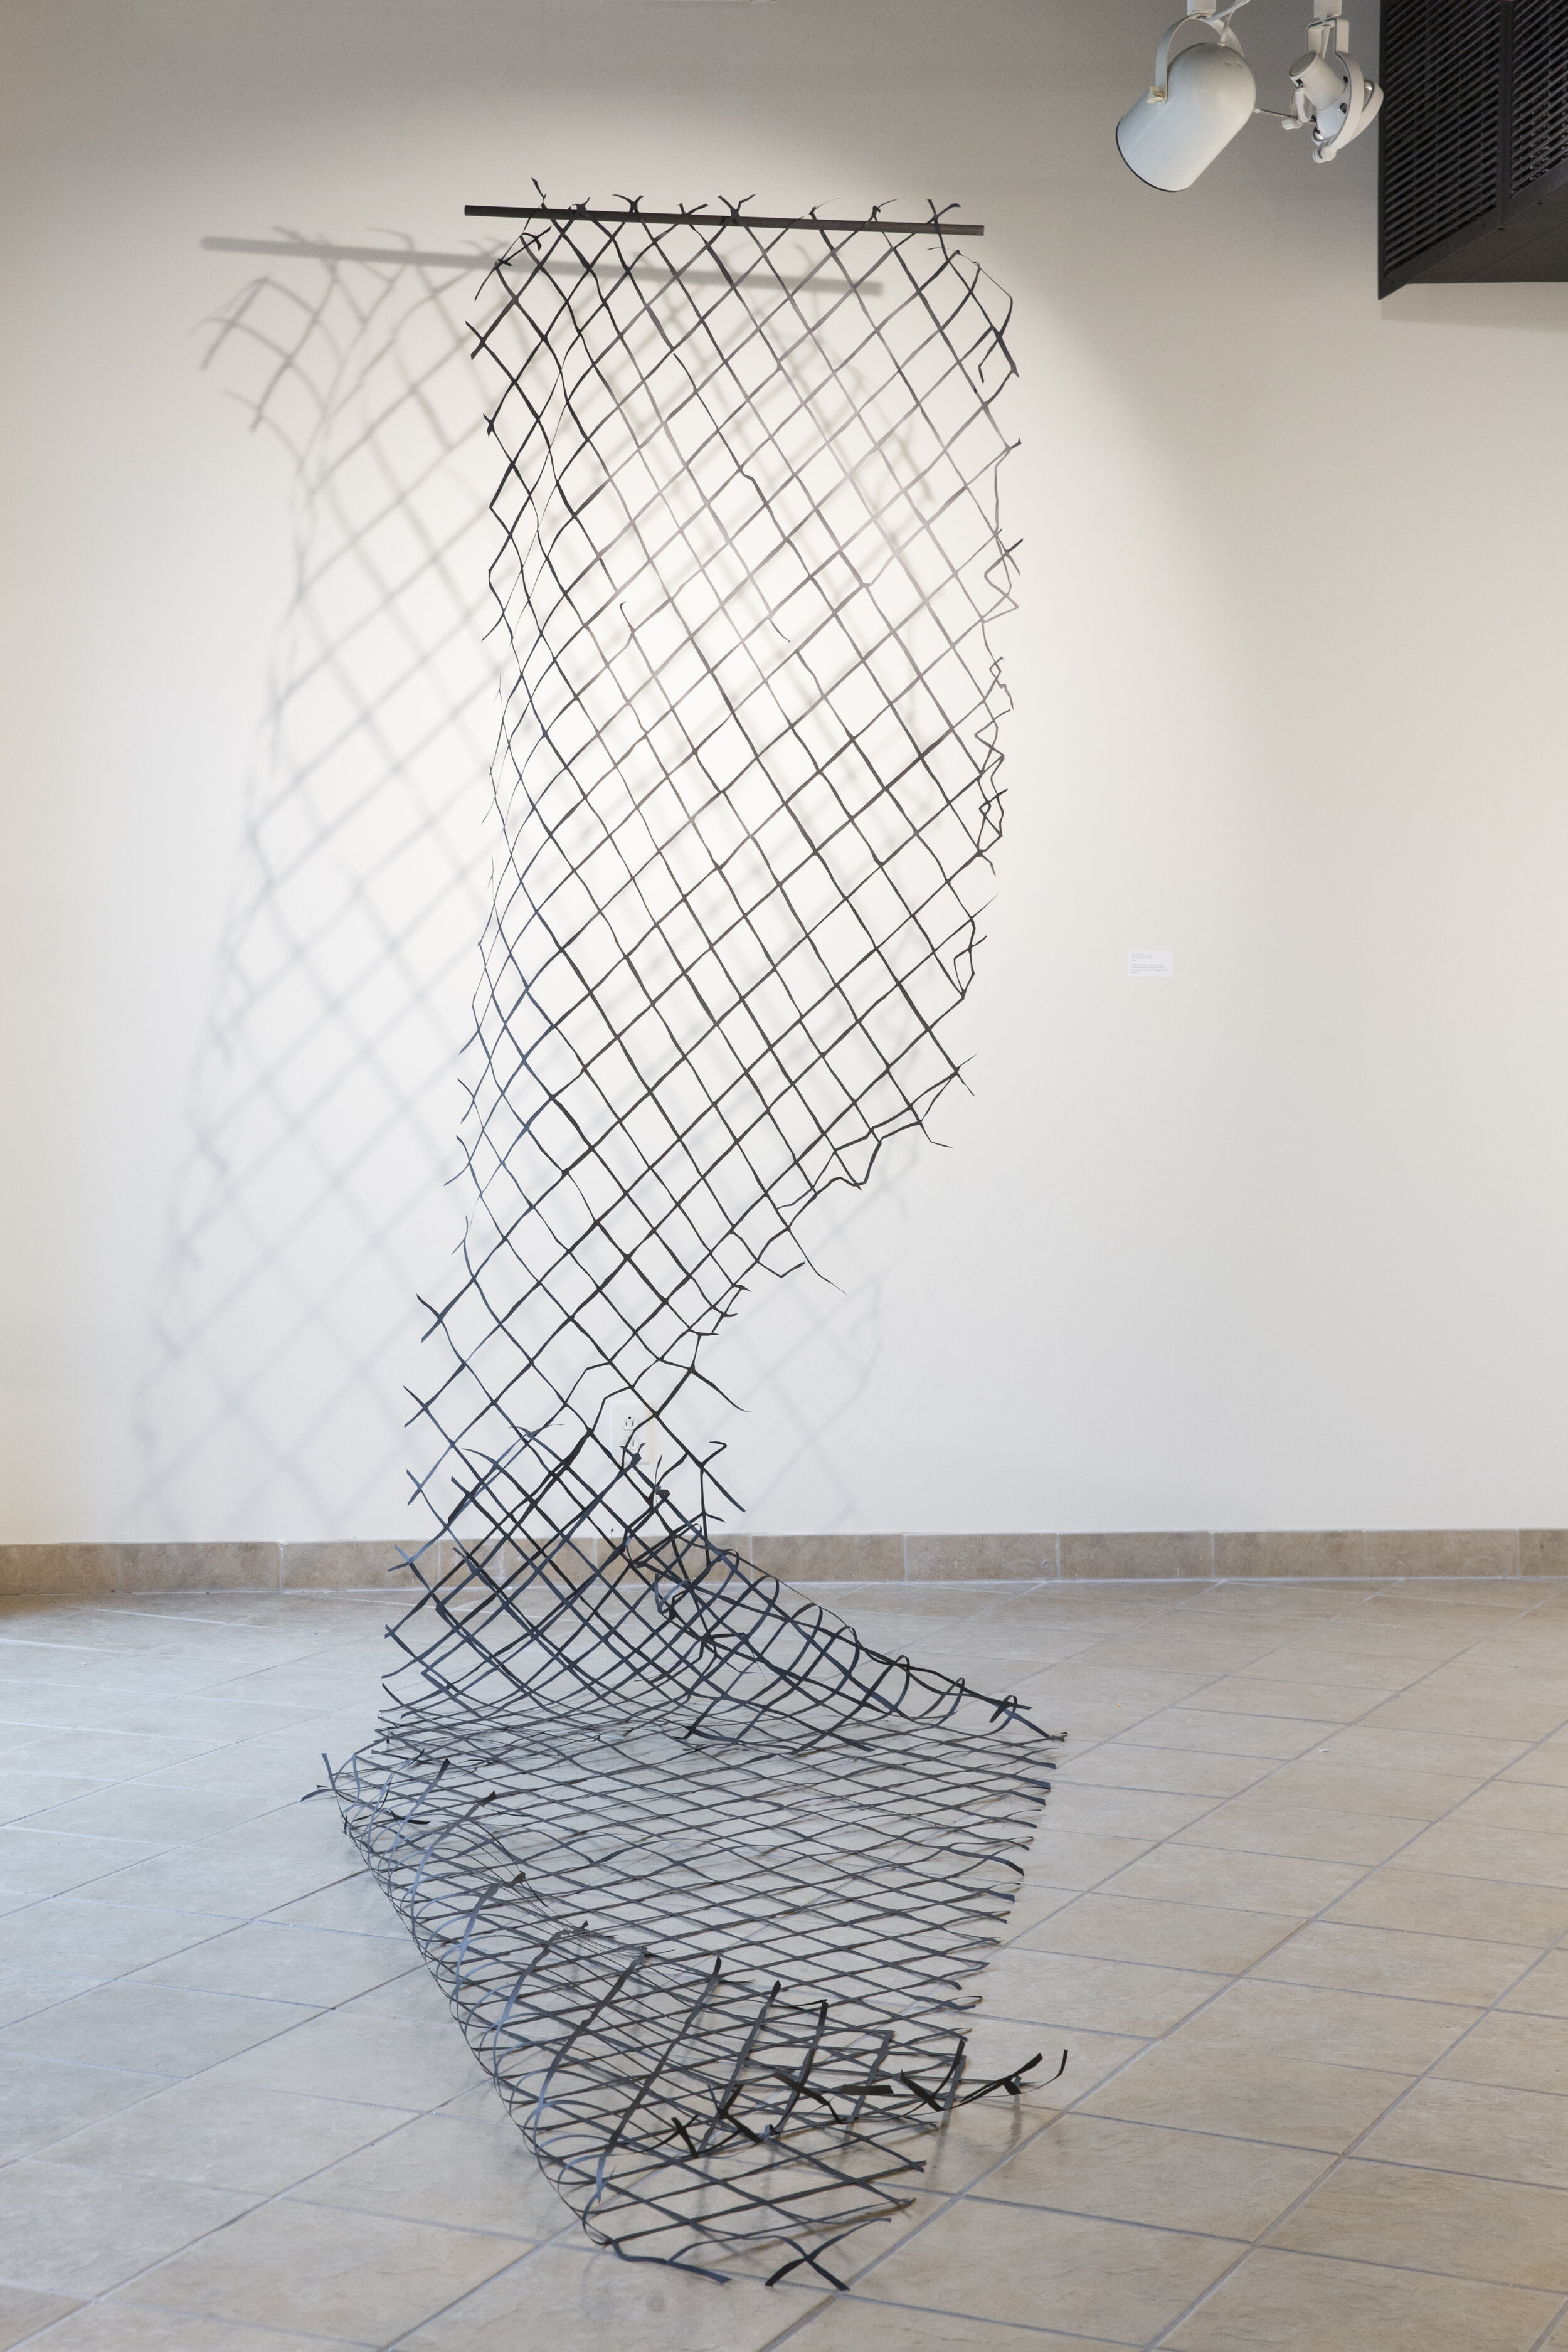  Fence, paper, and PVC, approx.  5’x18’, 2021		   